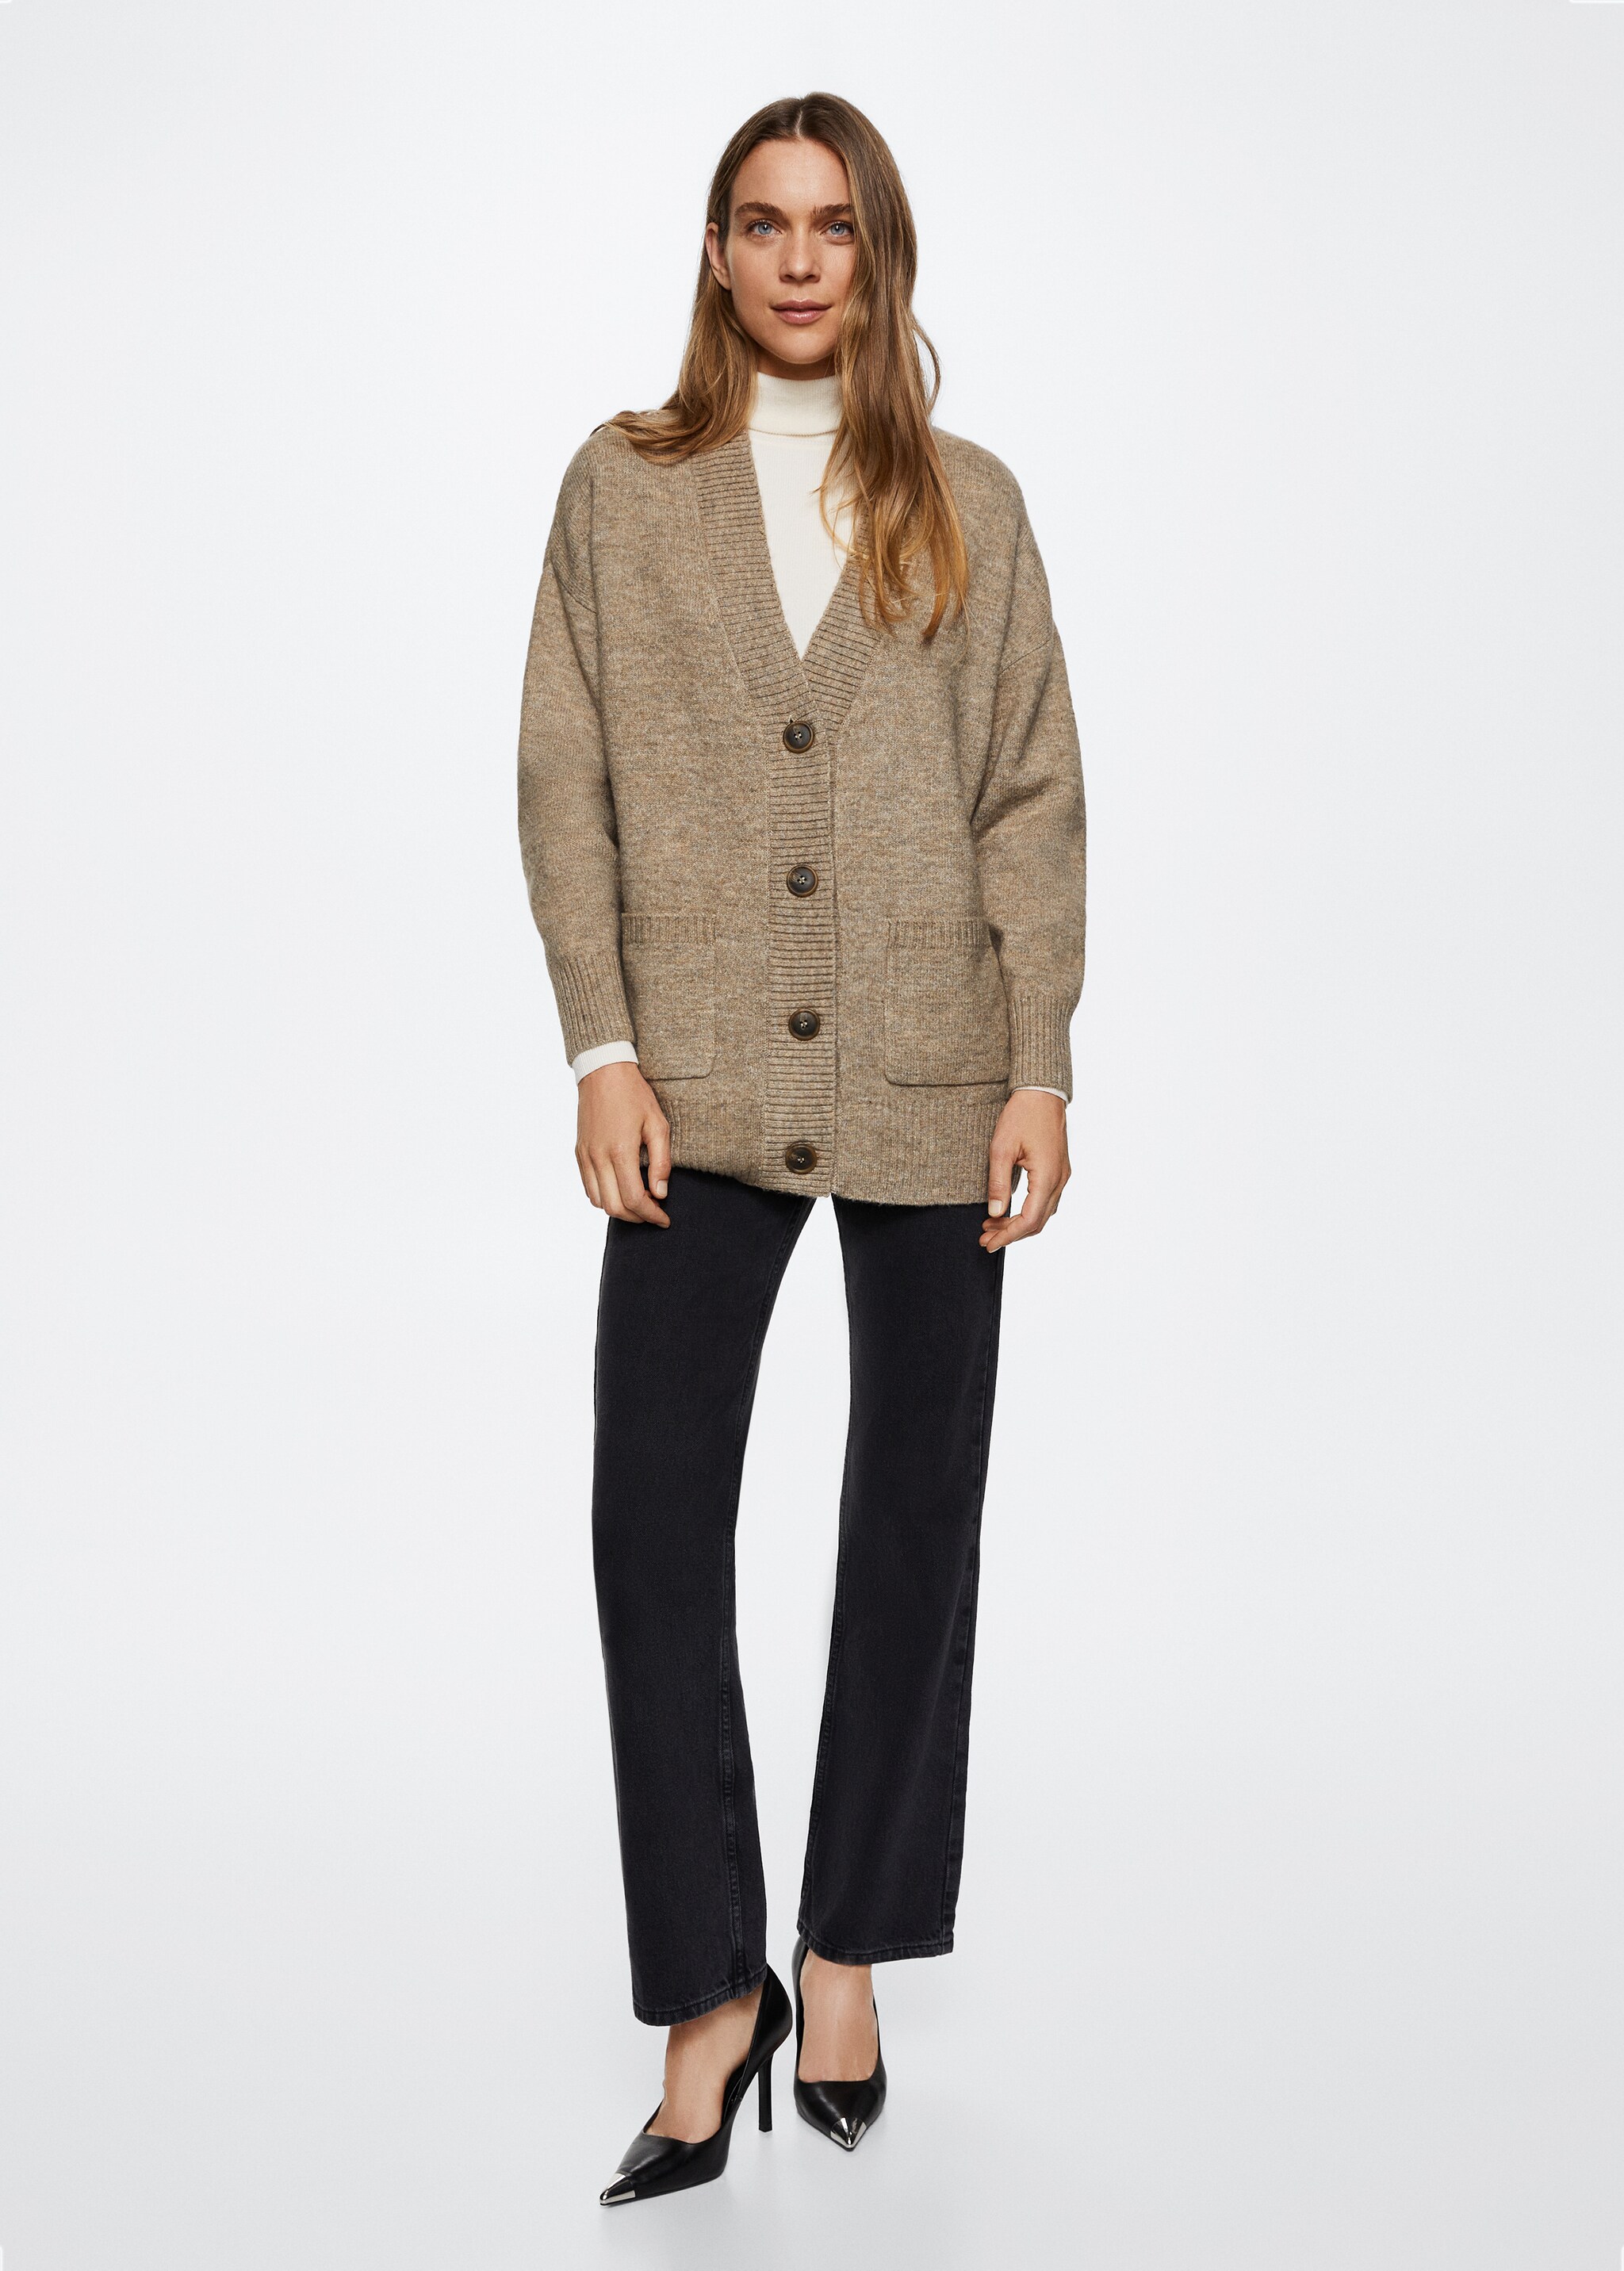 Oversized cardigan with buttons - General plane